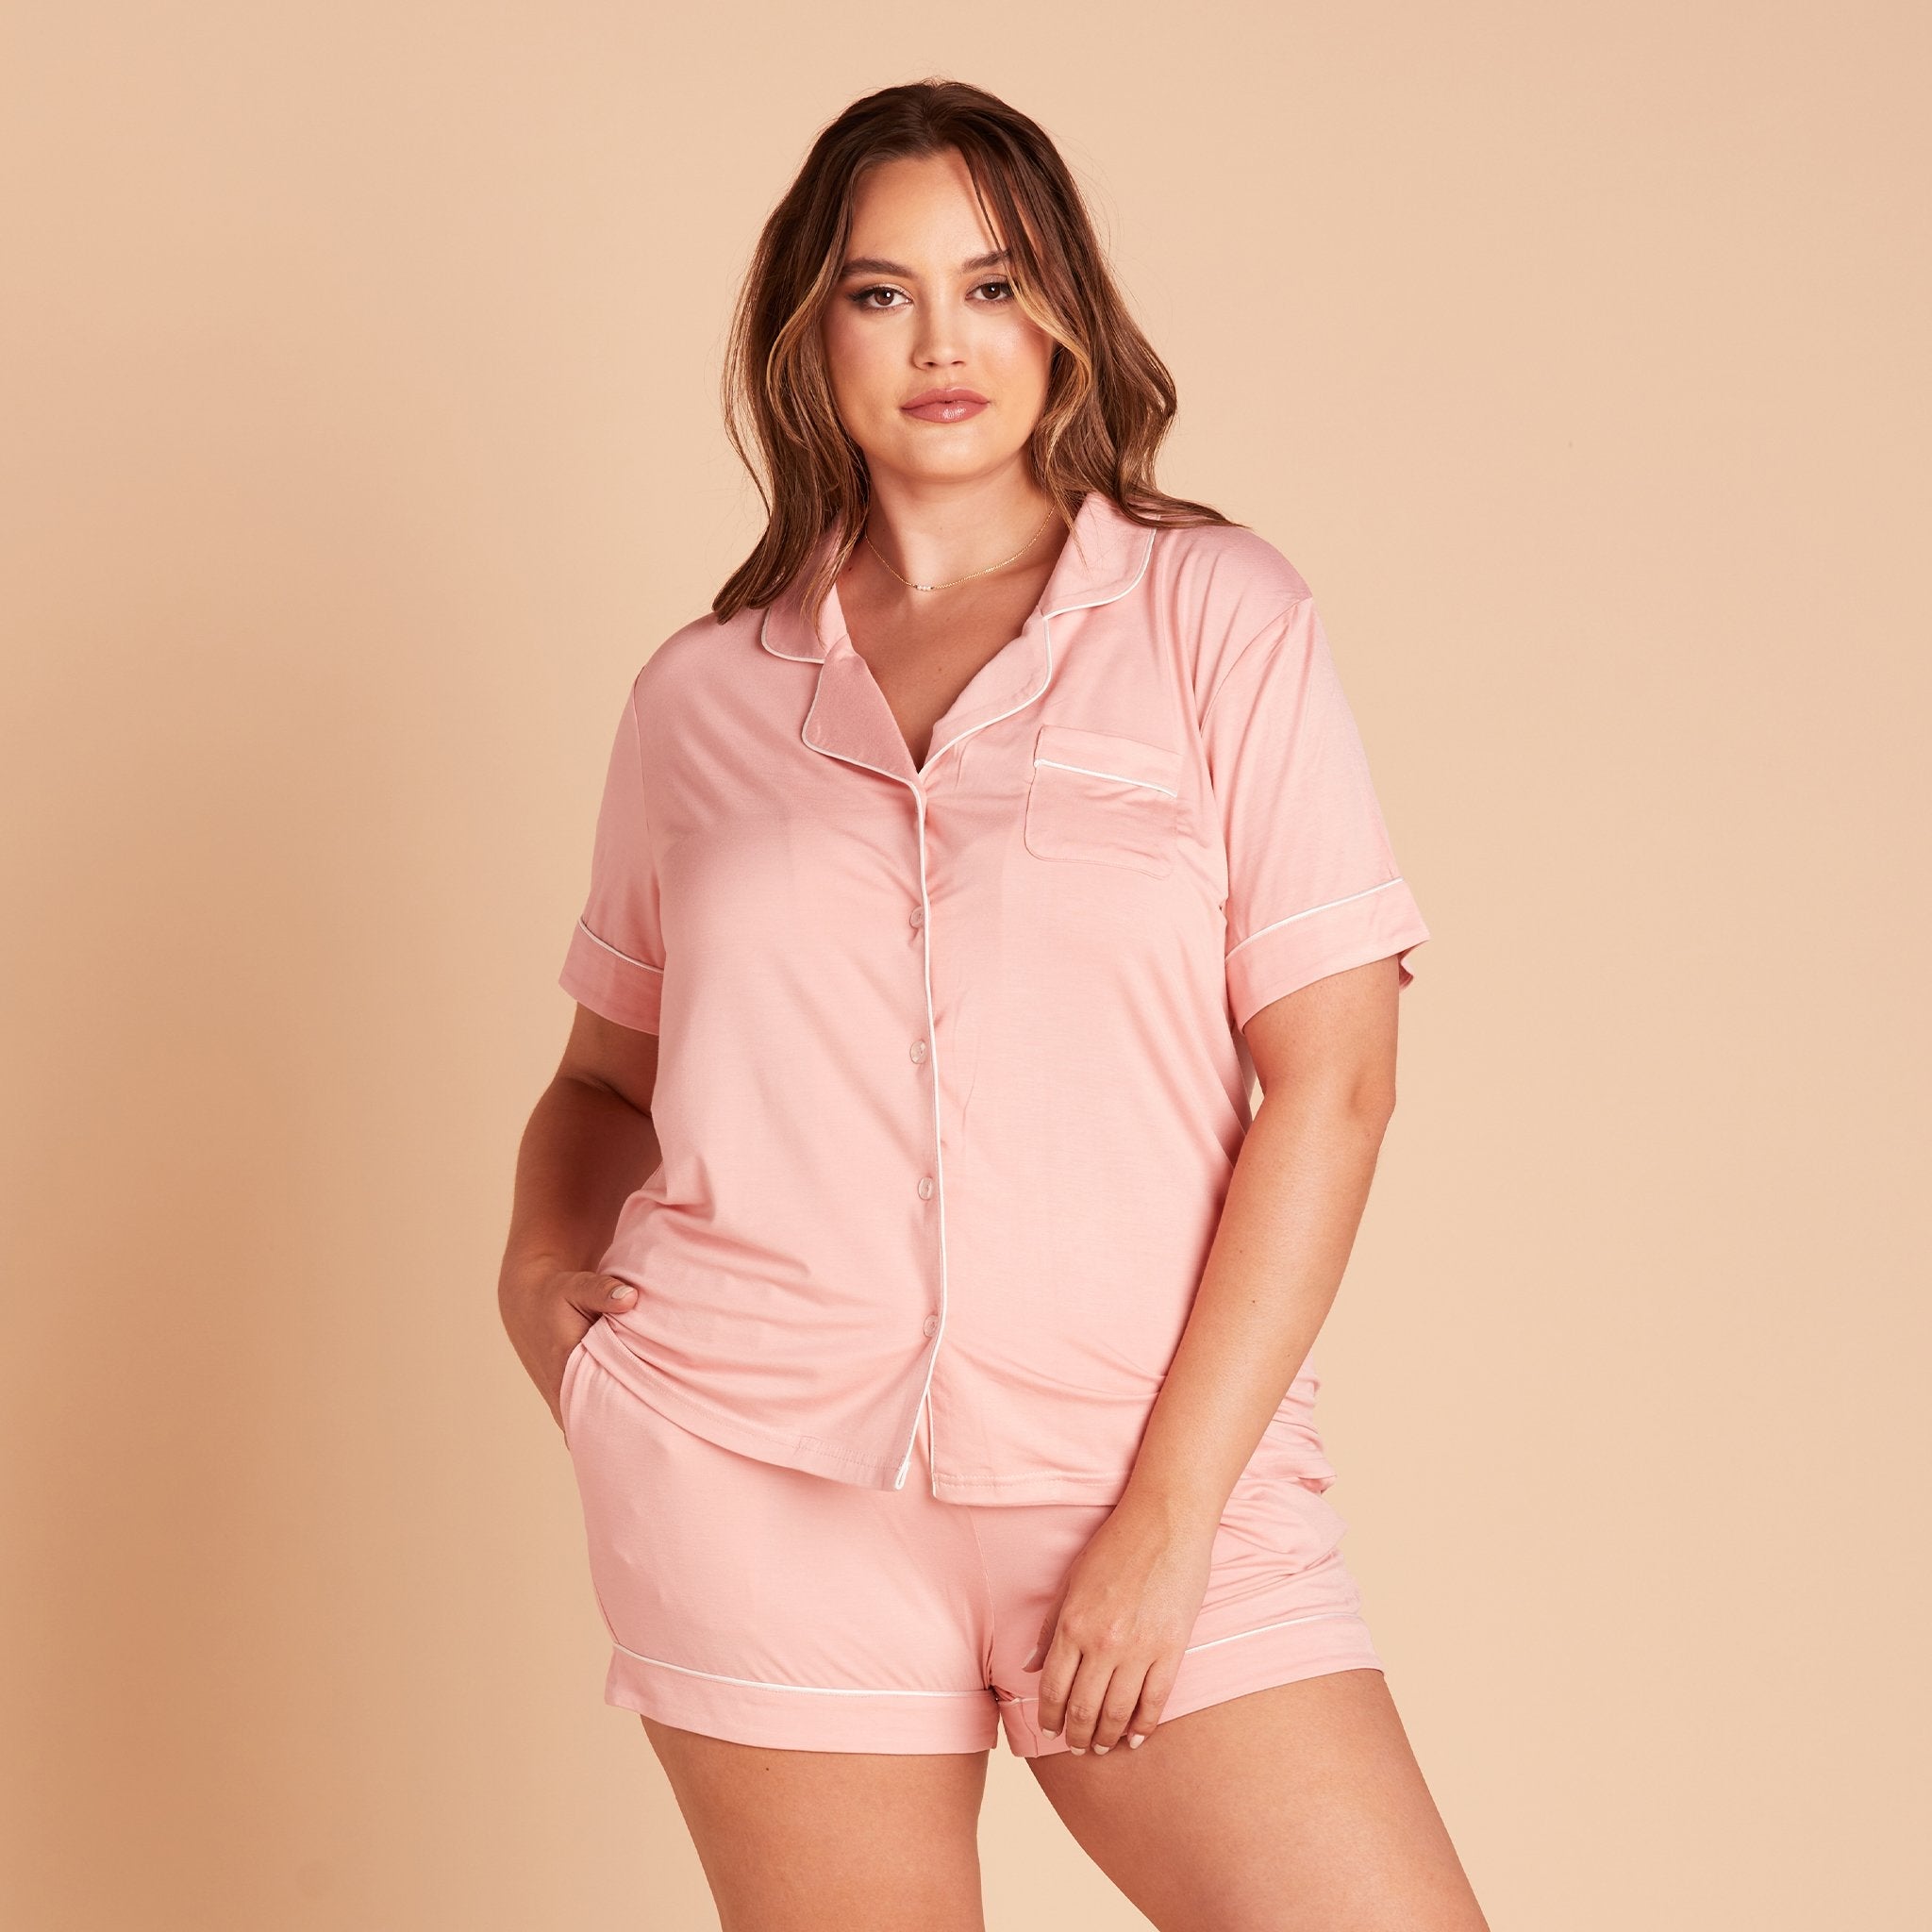 Jonny plus size Pajama Set in rose pink by Birdy Grey, front view